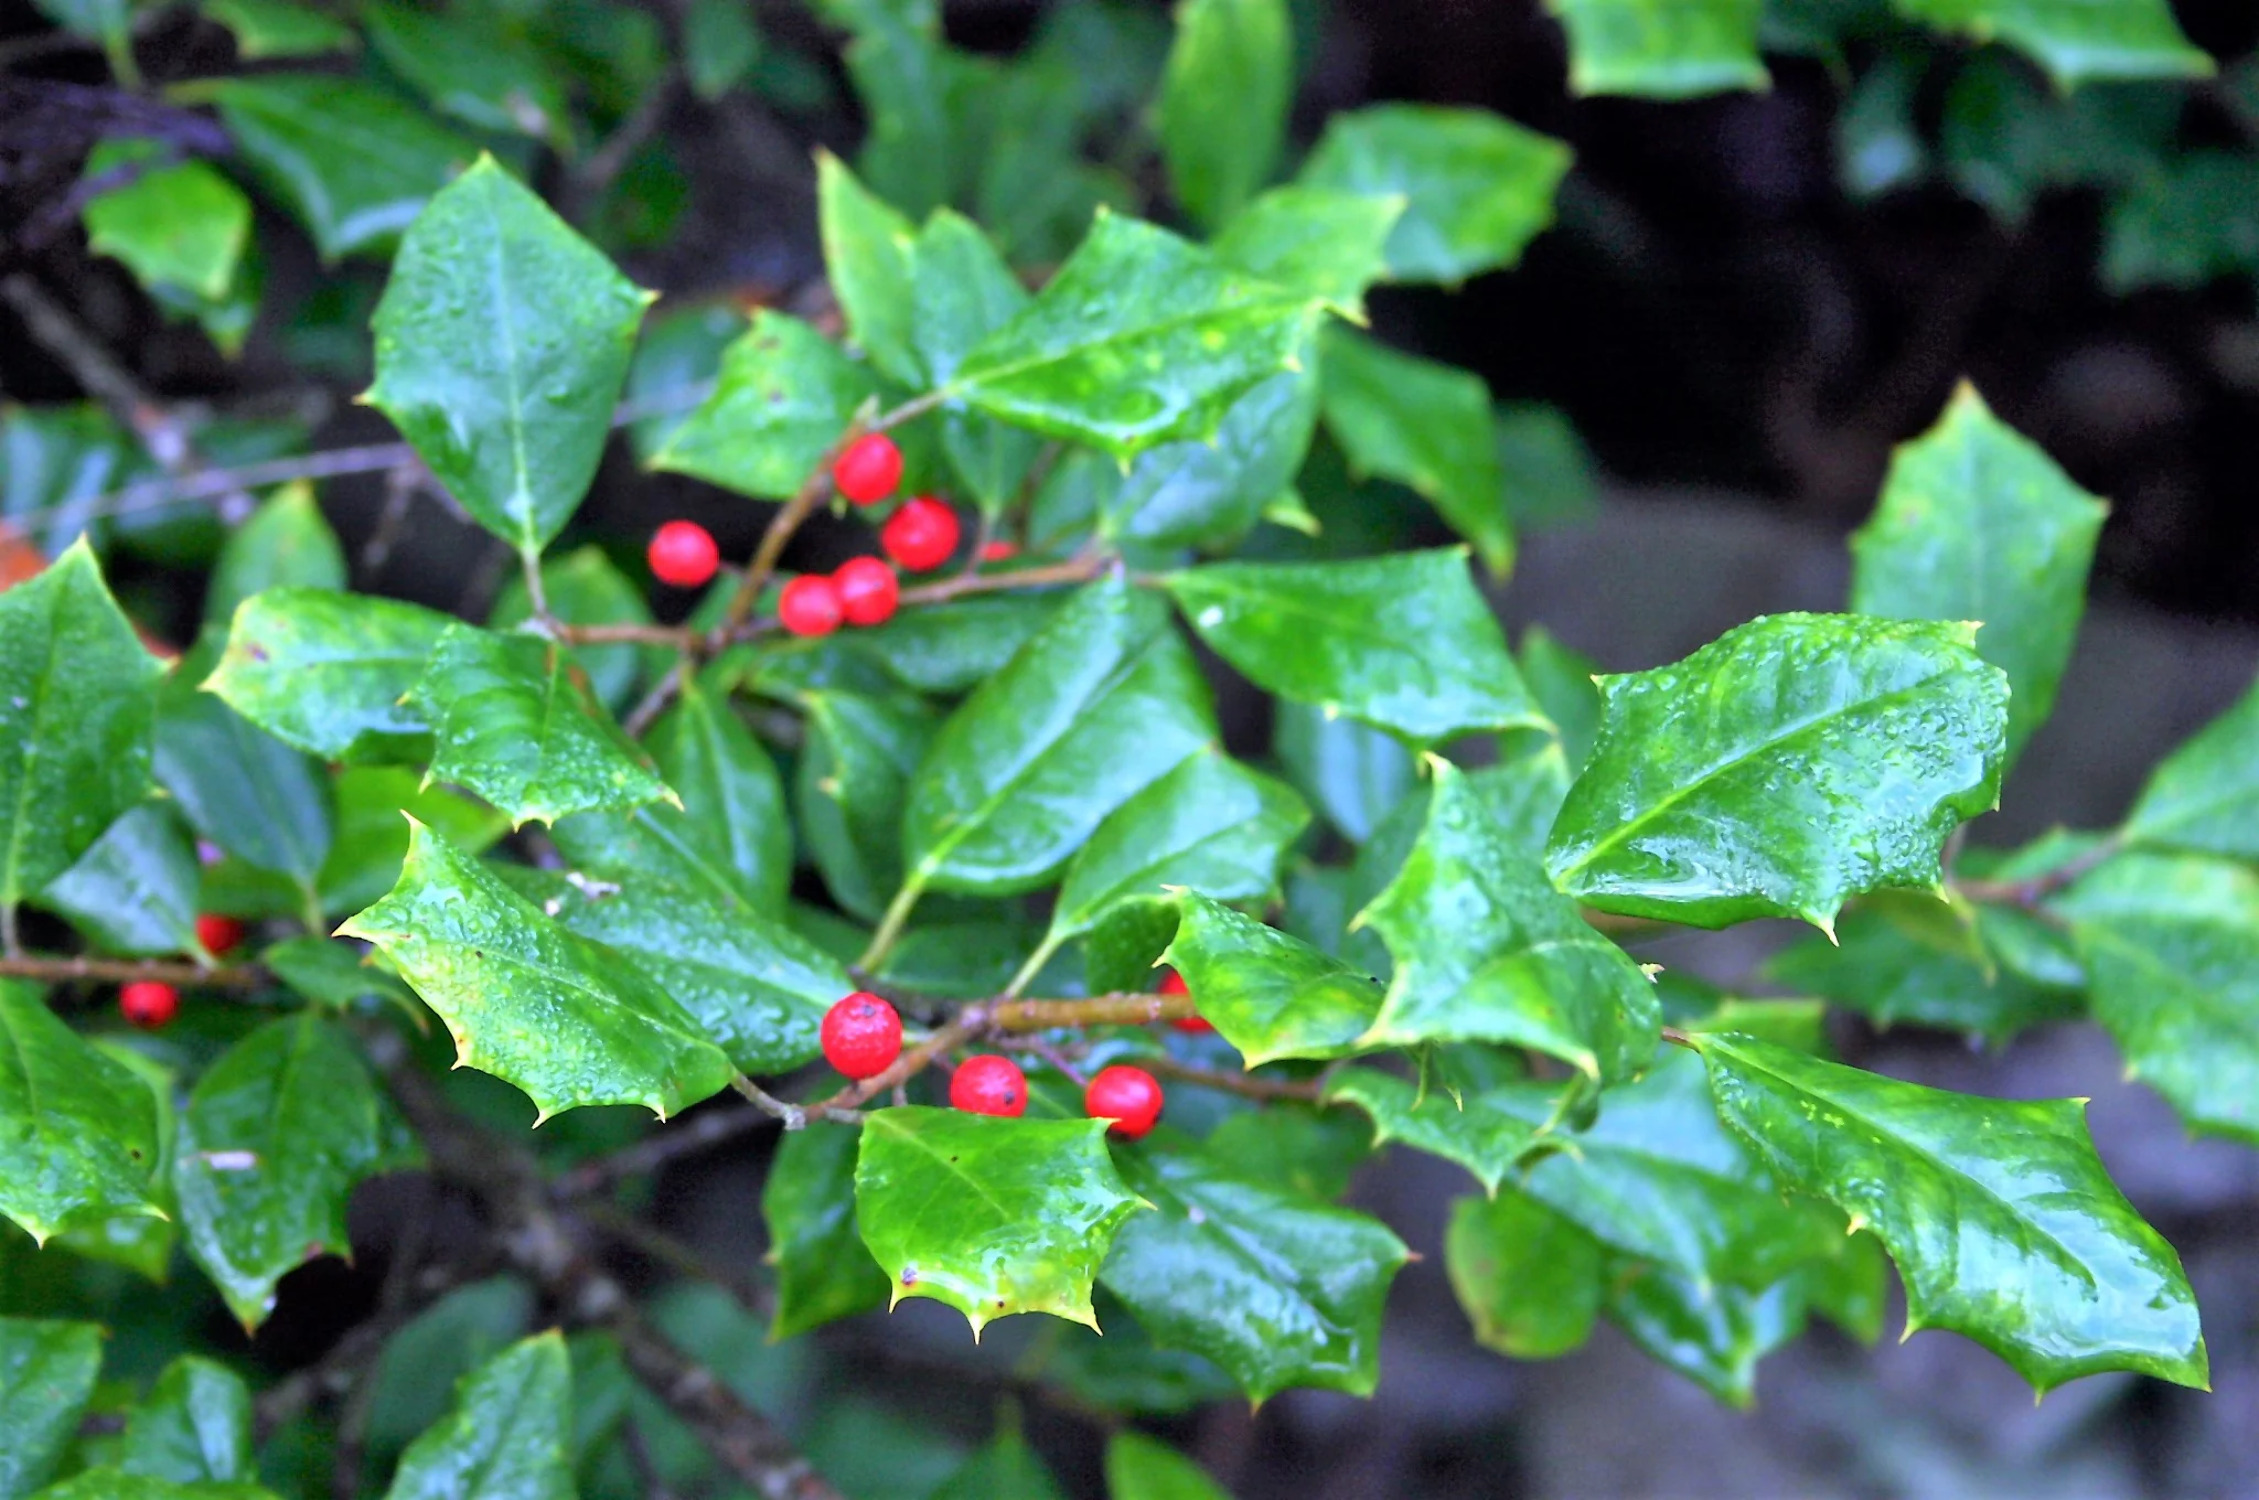 40 AMERICAN HOLLY Ilex Opaca Tree Shrub Evergreen Red Berry Seeds - aka White Holly, Prickly Holly, Christmas Holly, Yule Holly - image 2 of 11